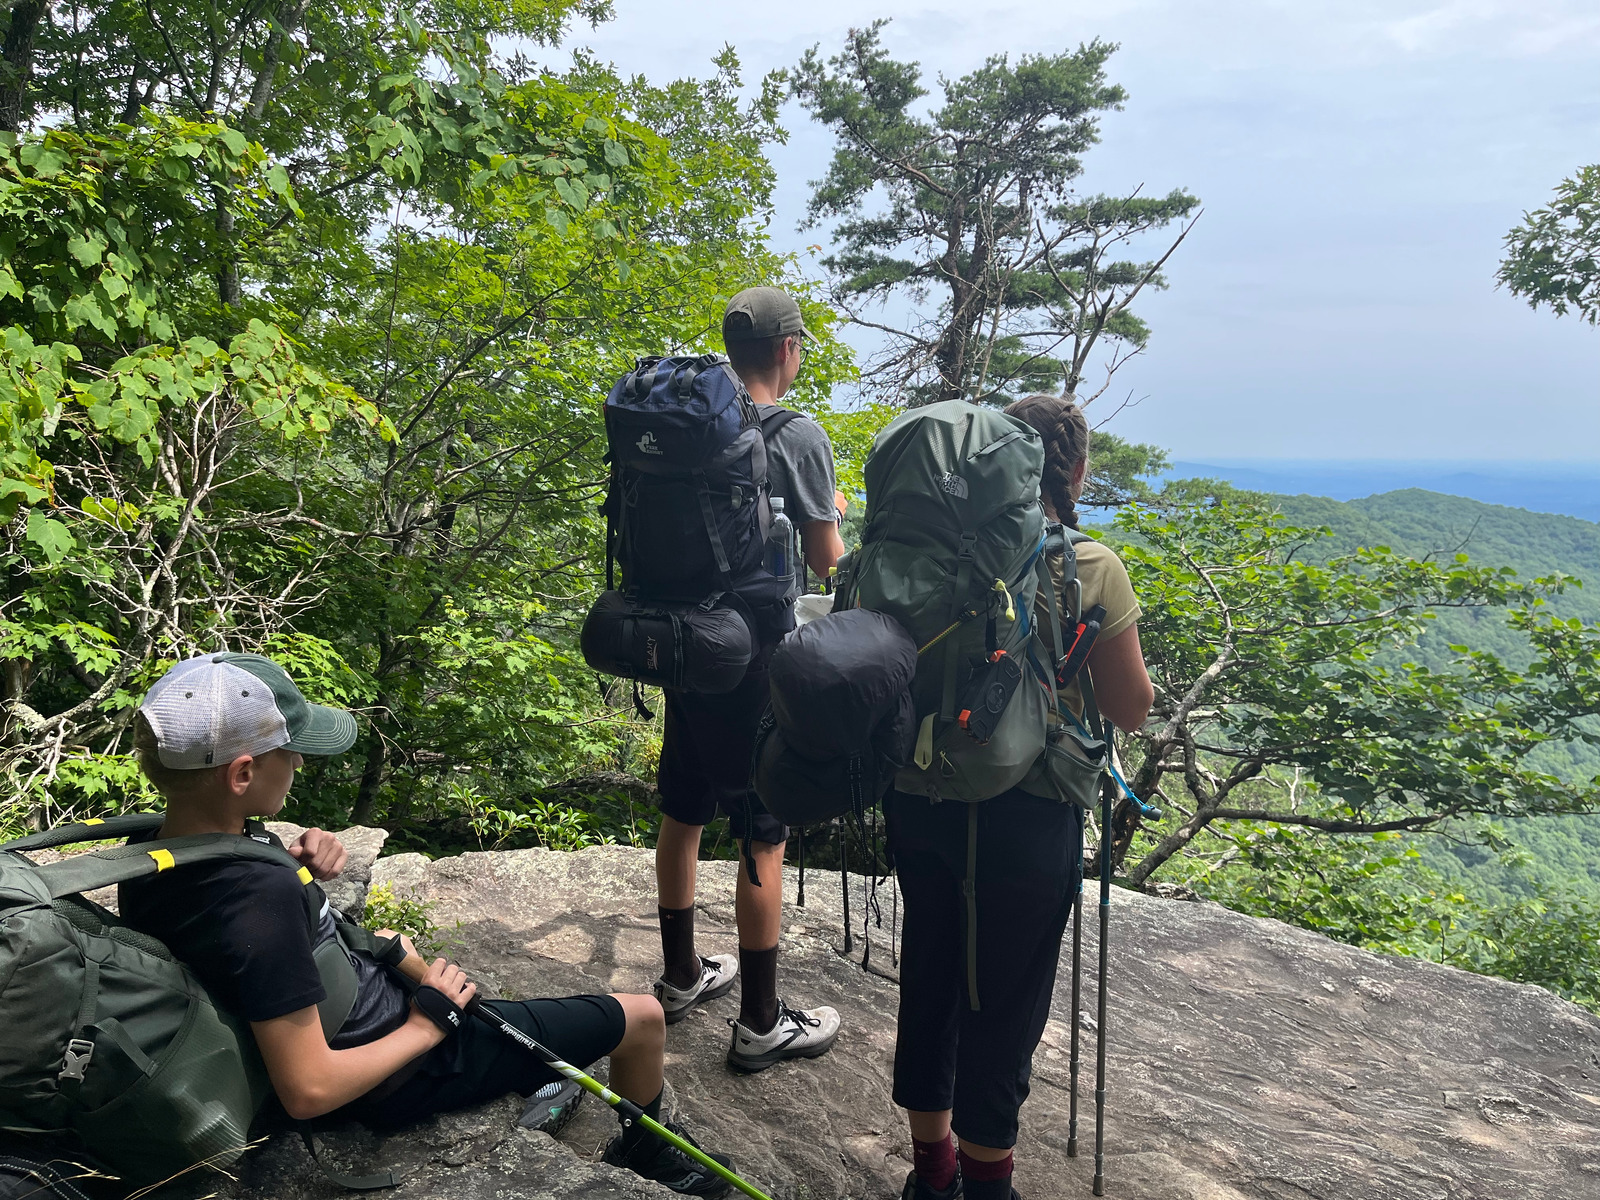 Making Family Memories on the Appalachian Trail